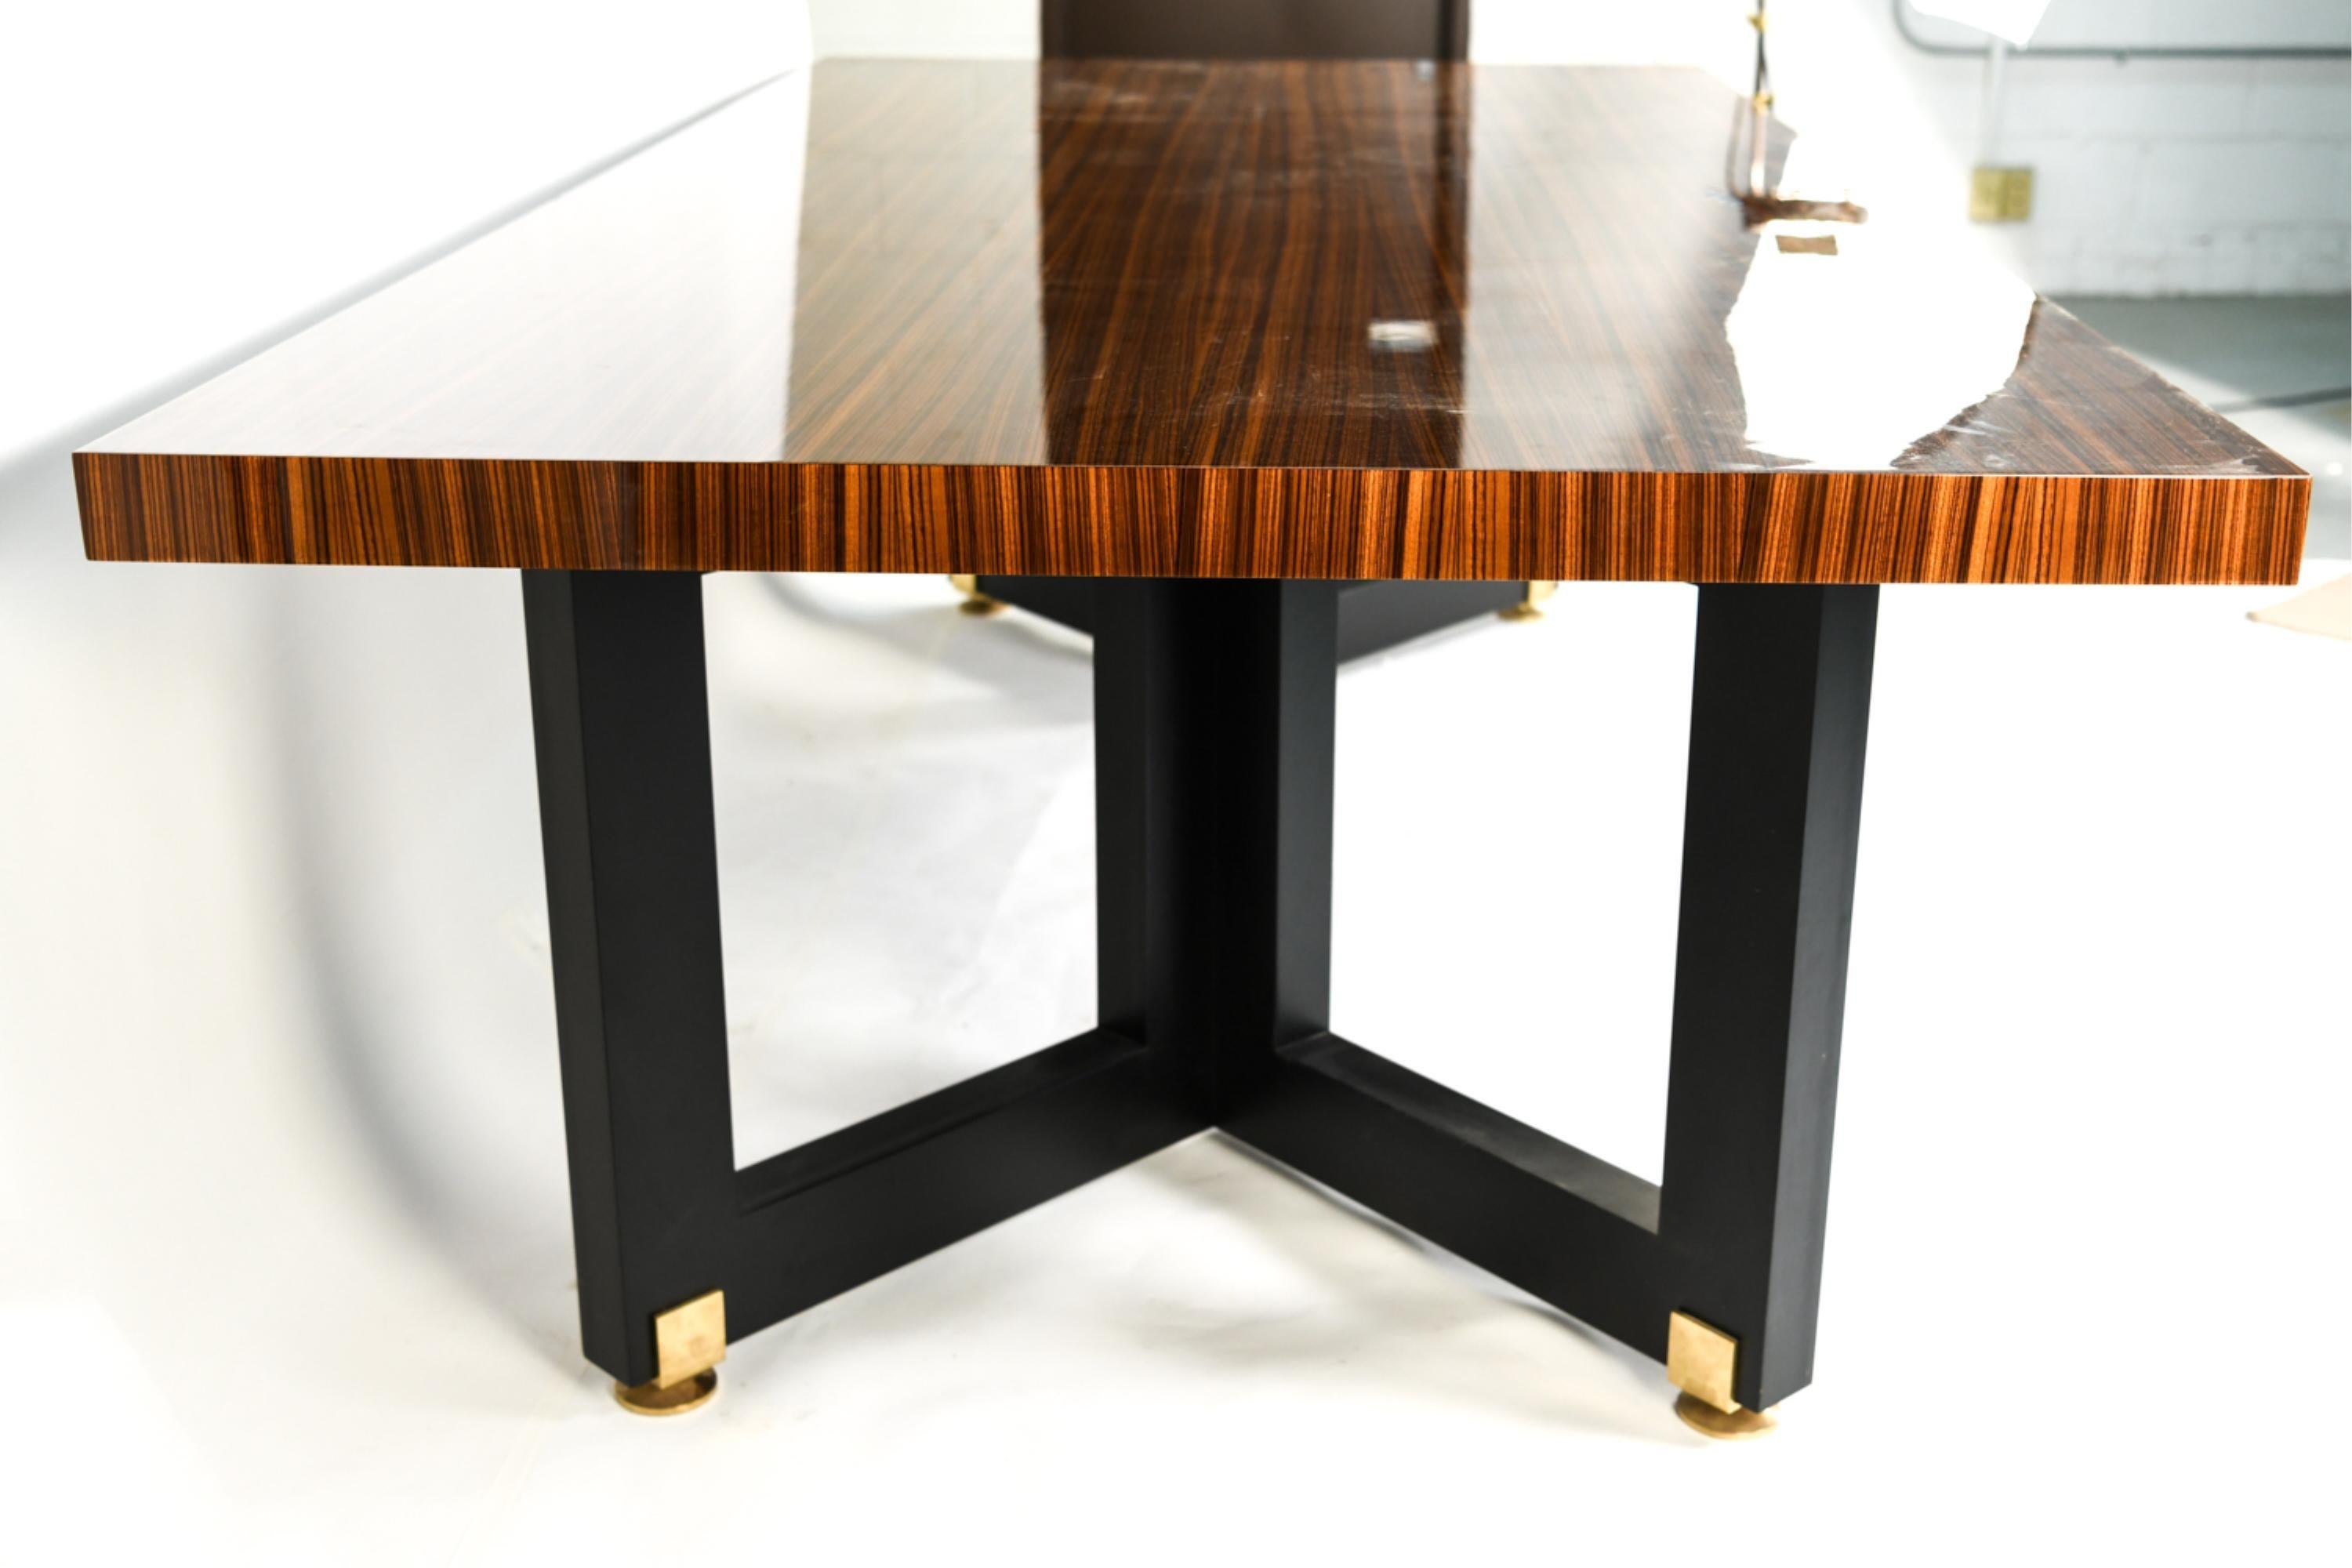 Lorin Marsh design smorgasbord dining table. New York, 2000s. Unsigned. Lacquered zebra-wood with enameled wood and brass. This absolutely stunning dining or conference table is spectacular and will certainty add grace and style to any room in the